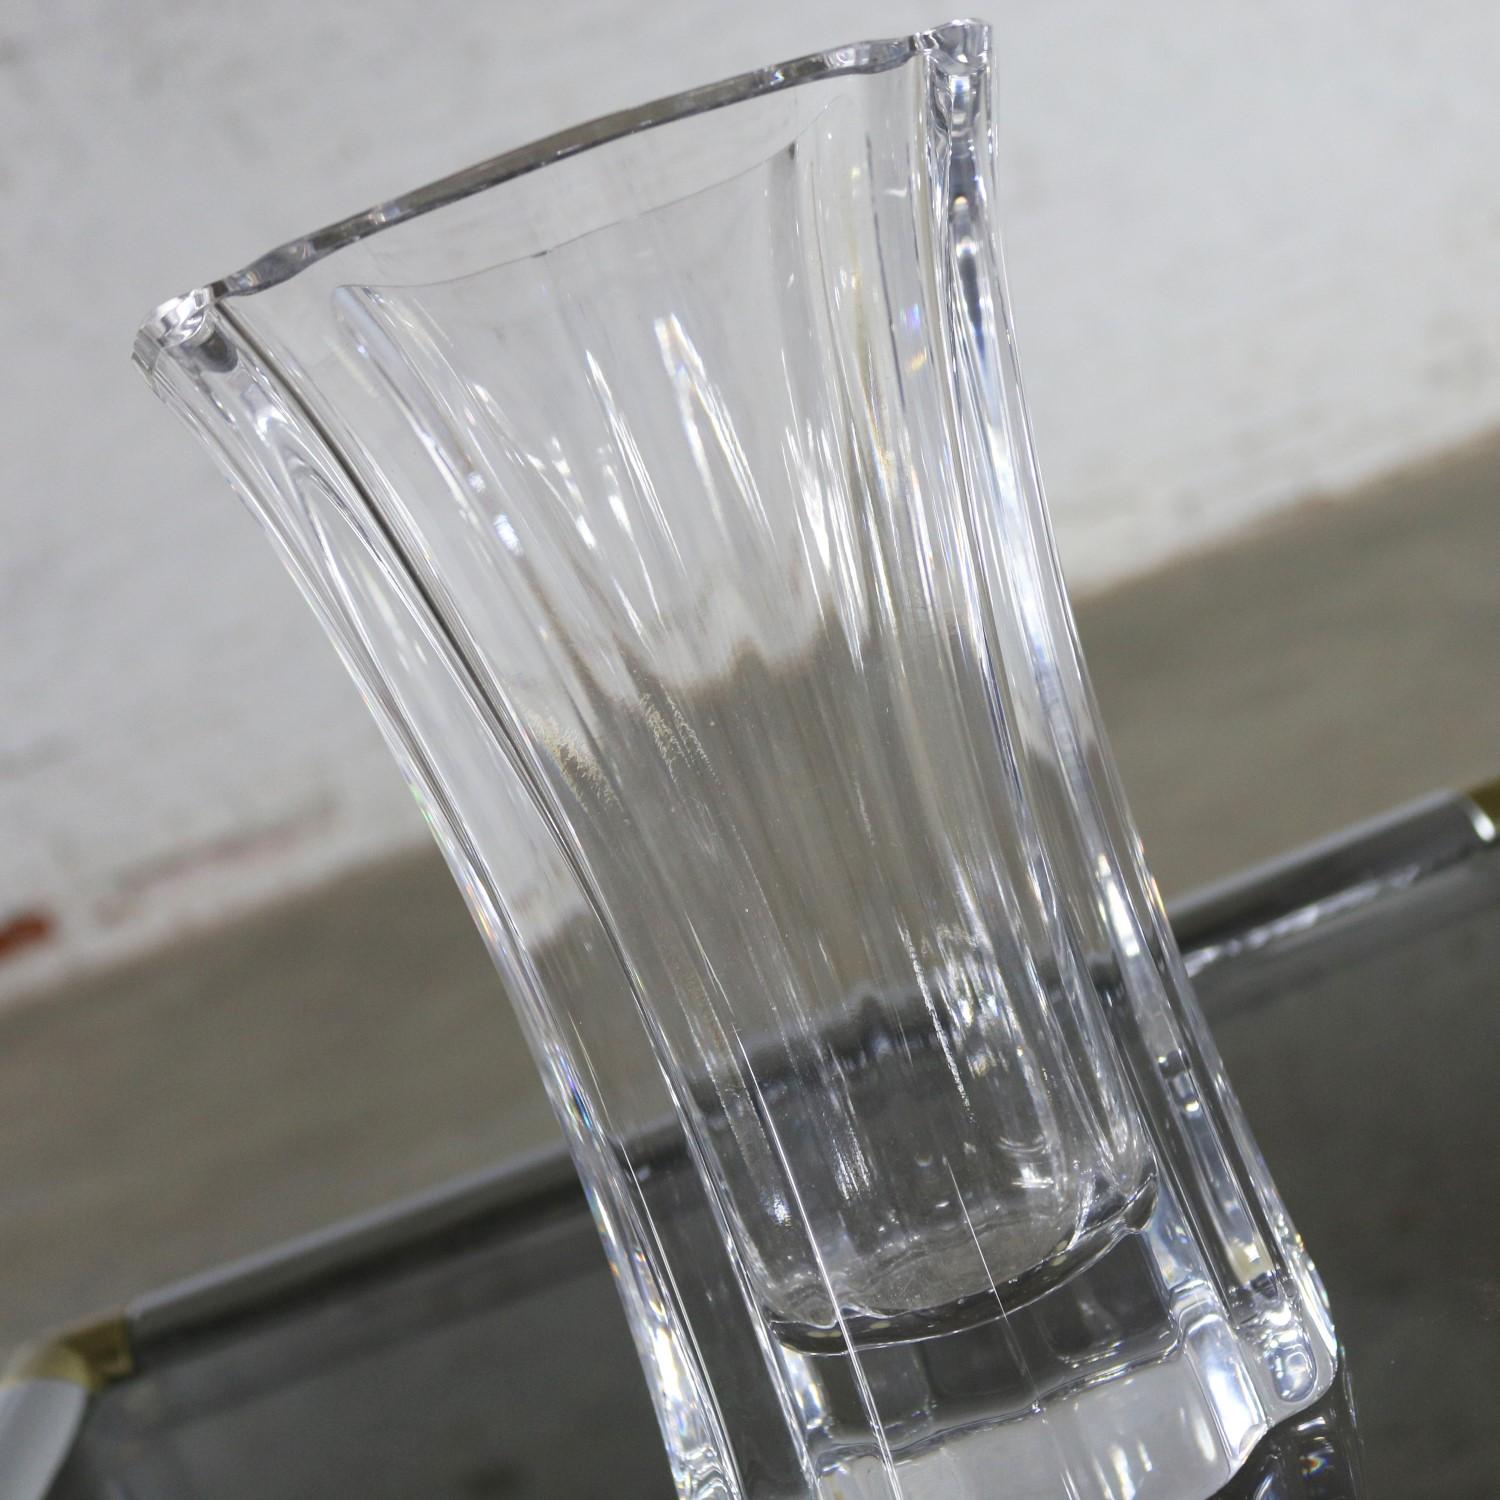 Beautiful 8 inch tall crystal vase designed by Lars Hellsten for Orrefors. It is signed and numbered LH 4599-22 and in fabulous vintage condition, circa late 20th-early 21st century.

What a lovely crystal vase for a beautiful bouquet or just